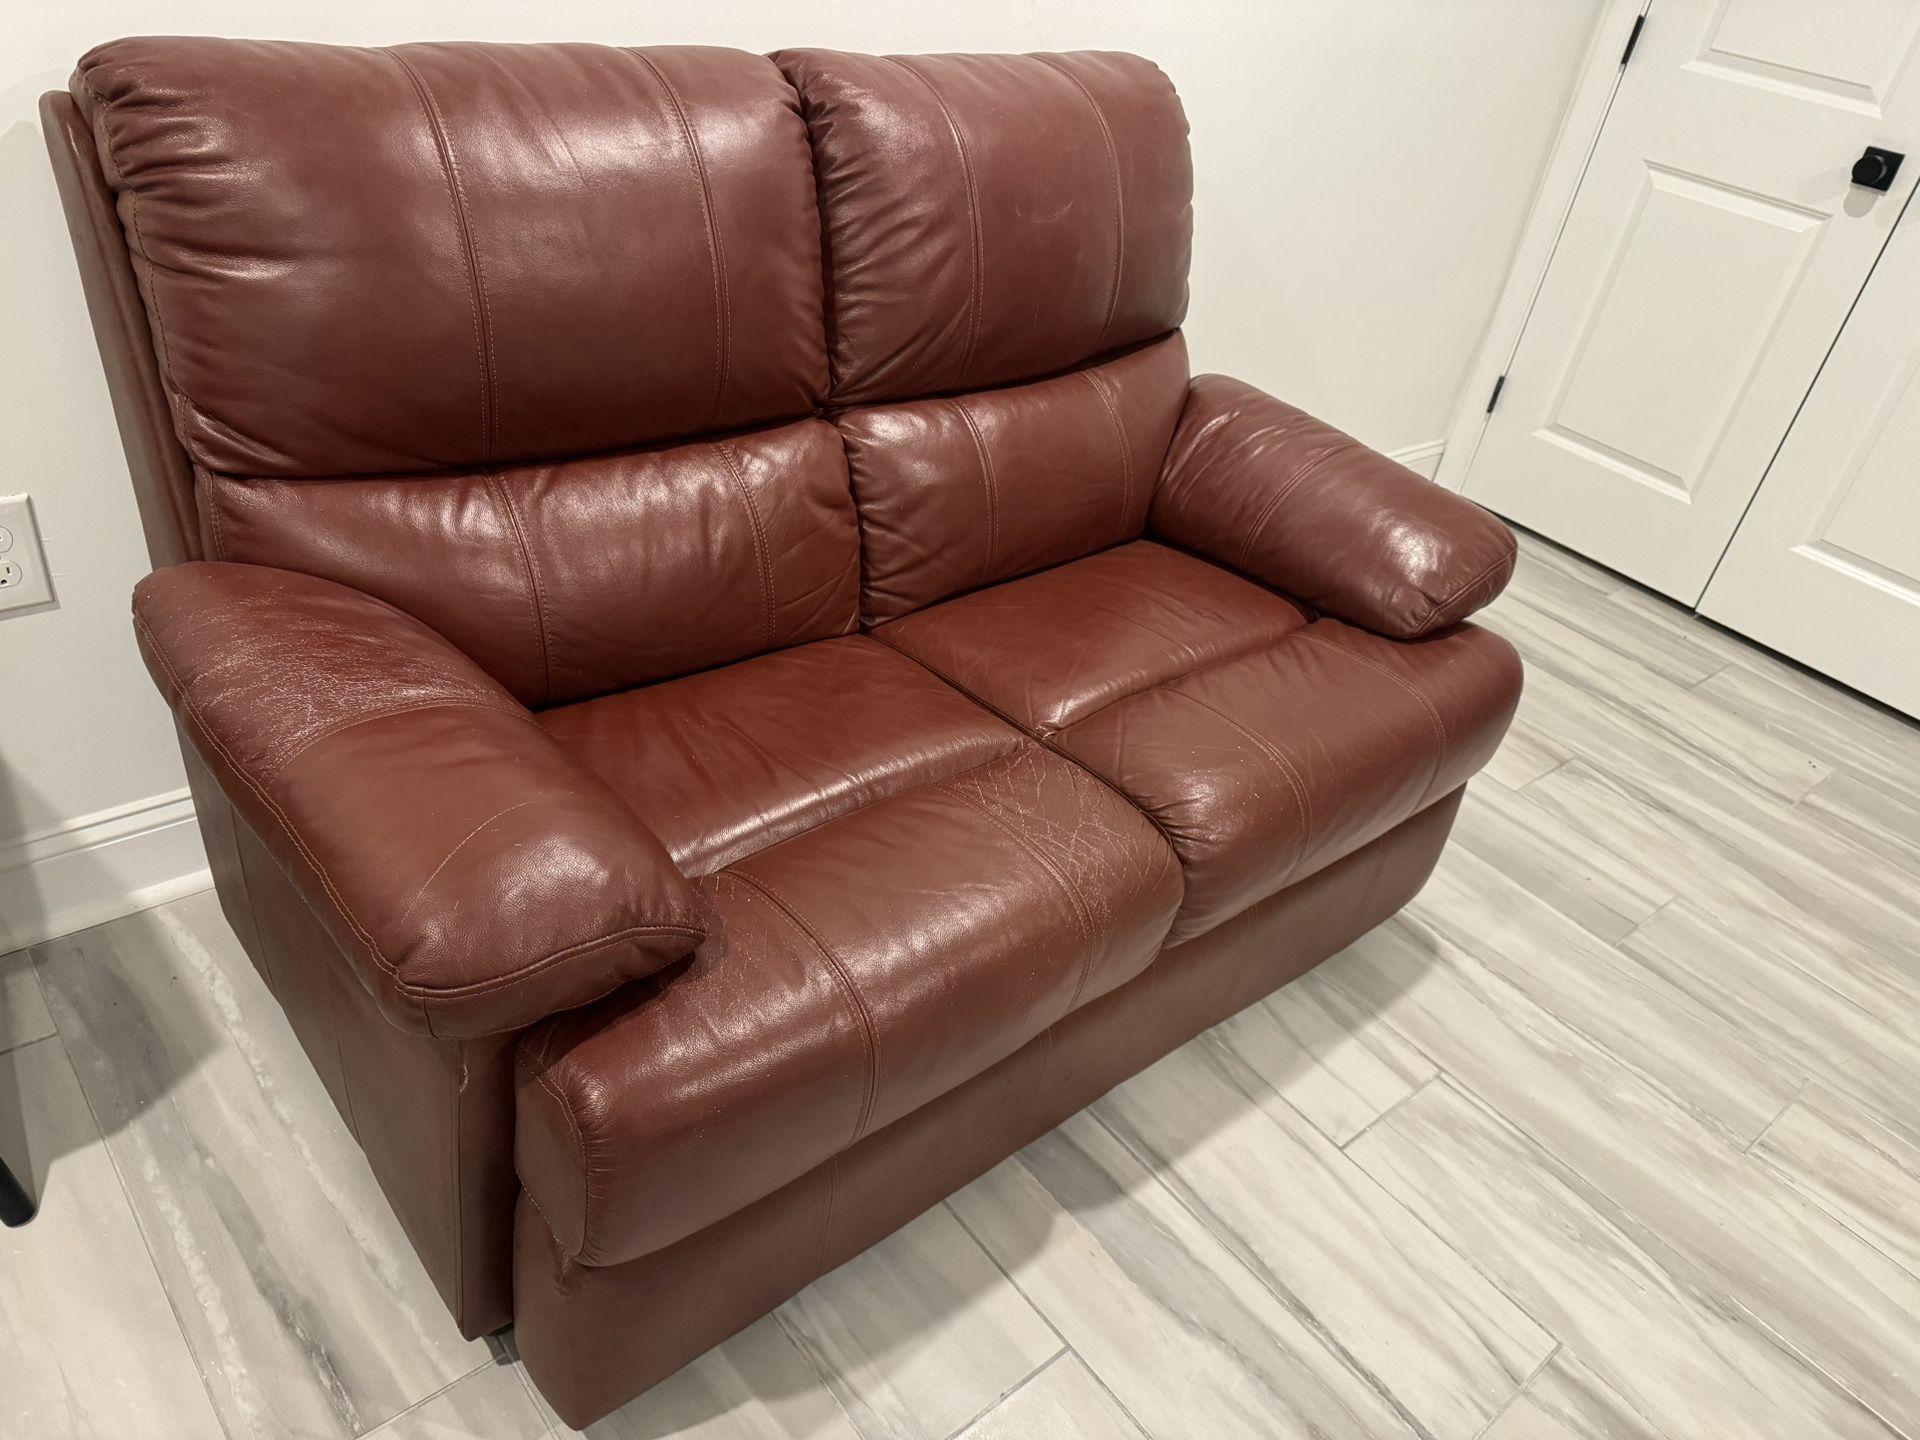 FREE Brown Faux Leather Loveseat Couch